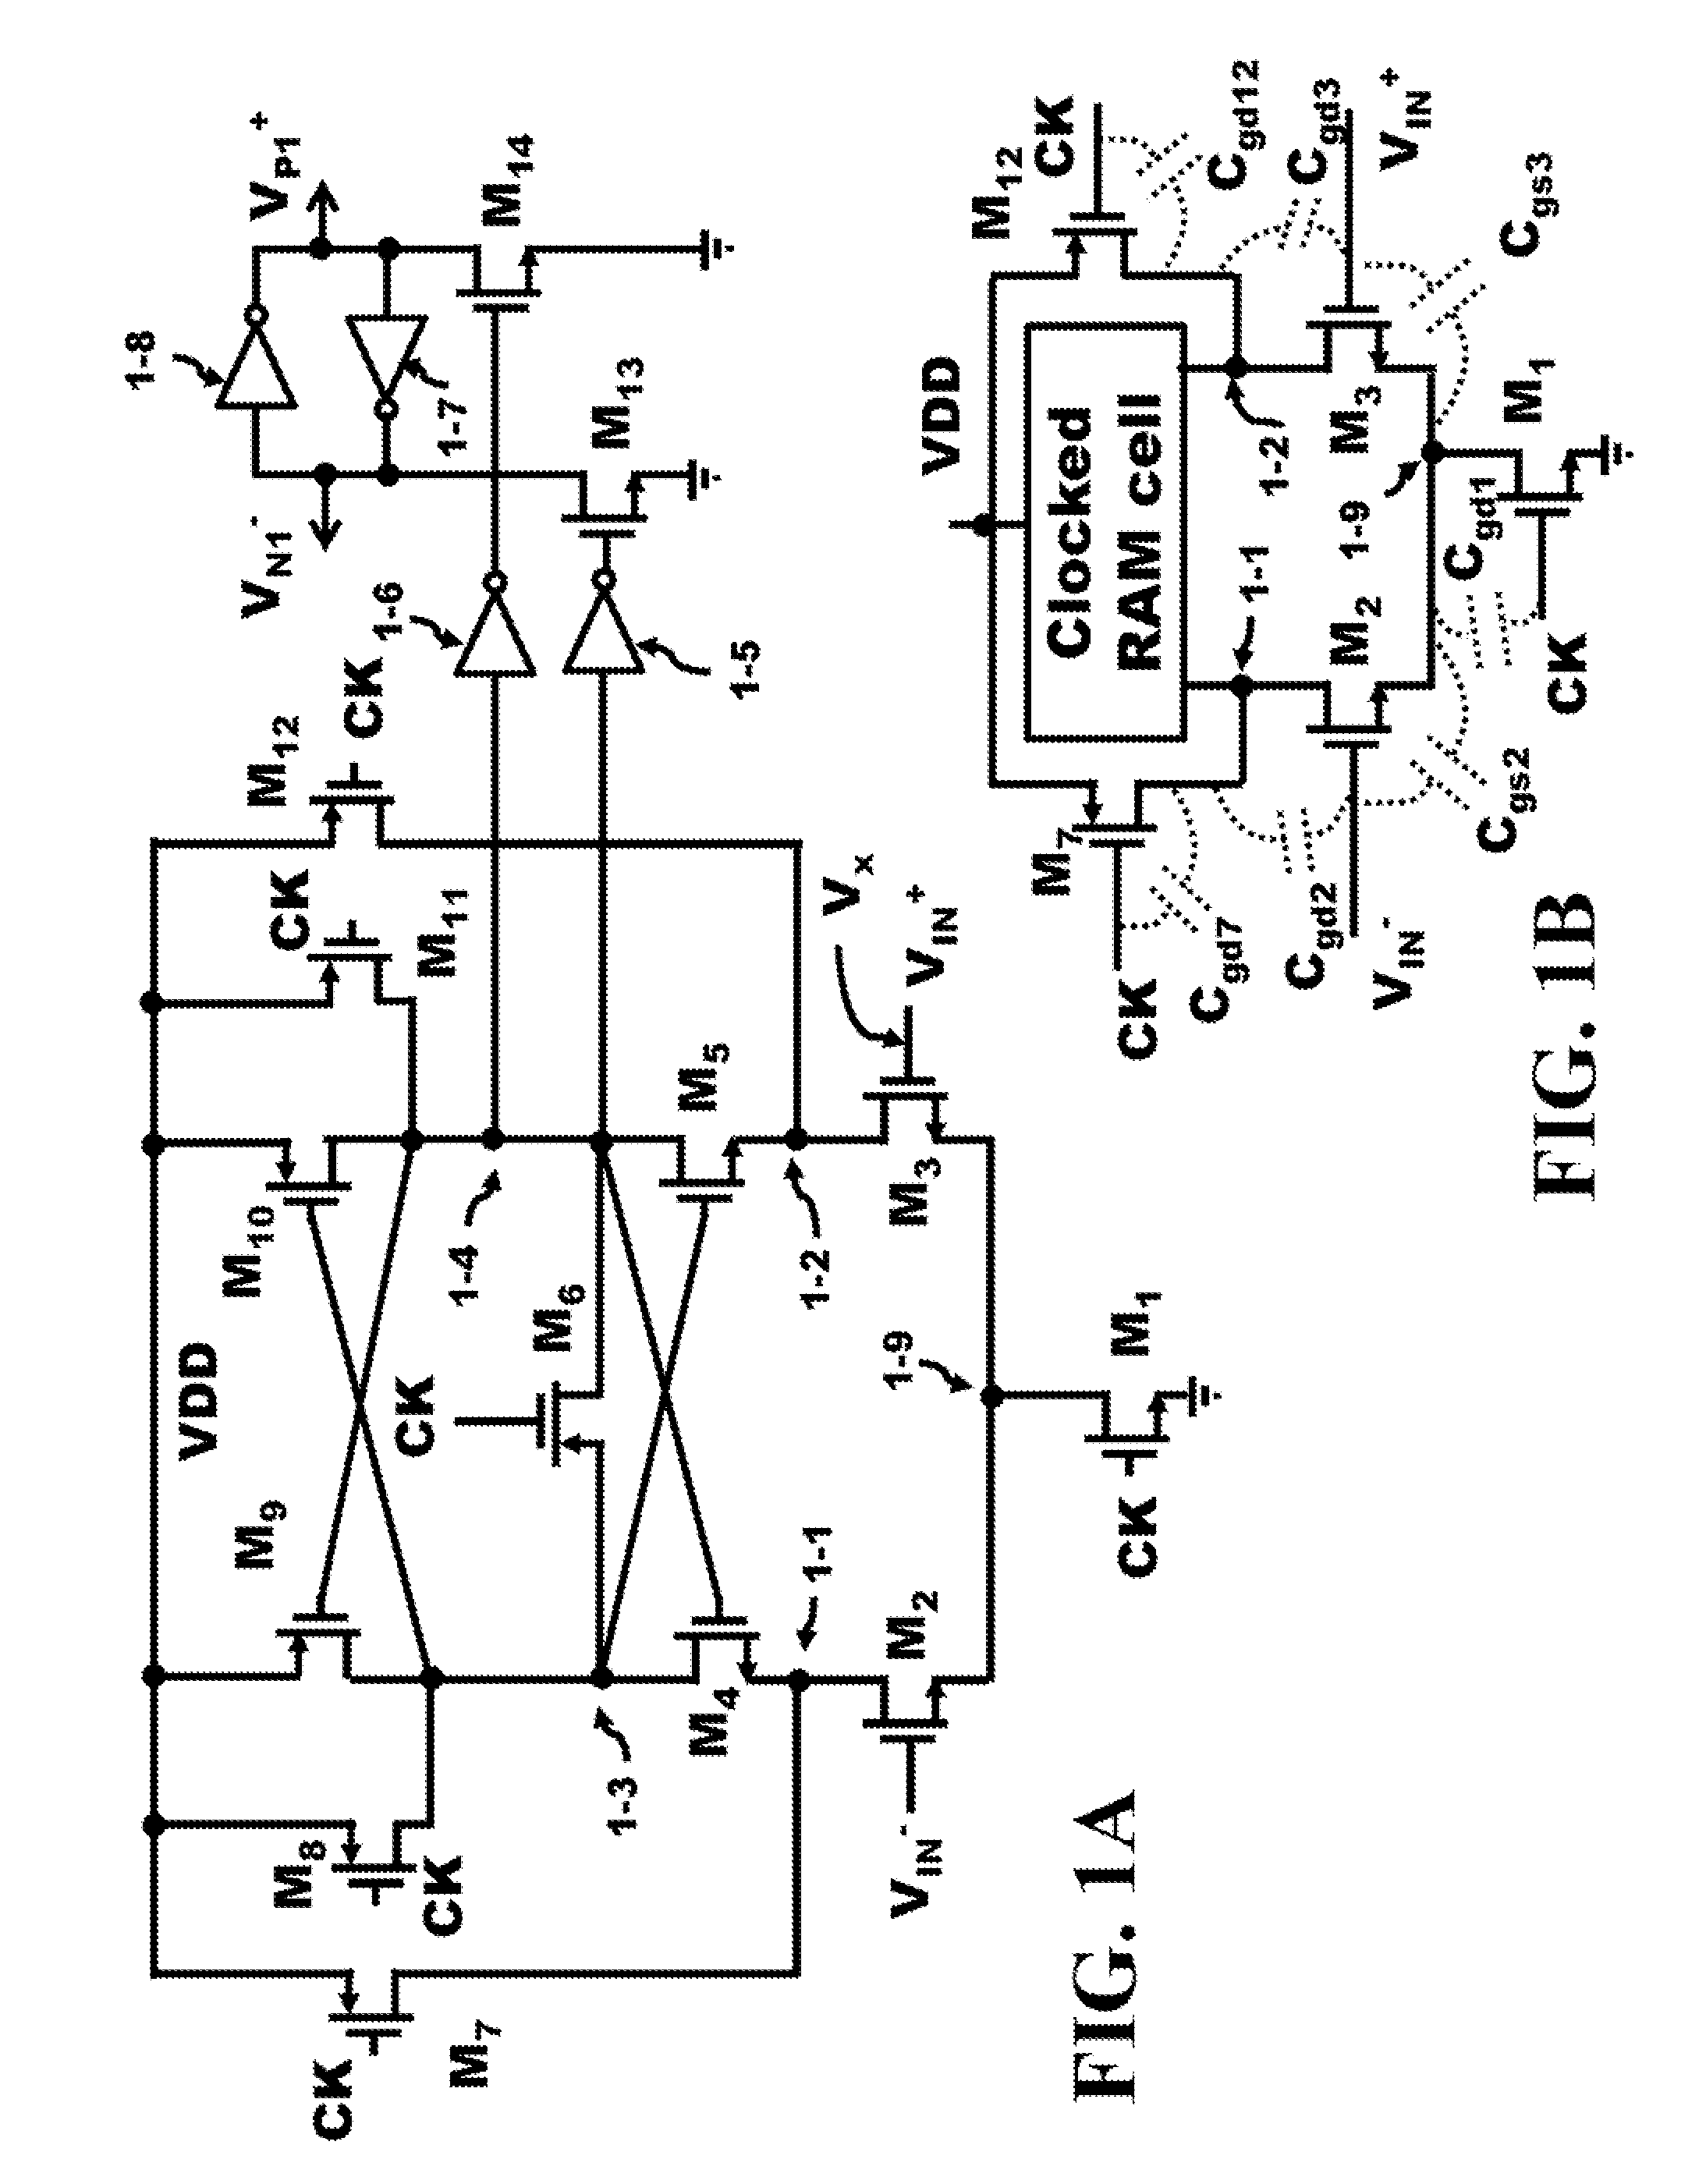 Method and Apparatus for an Active Negative-Capacitor Circuit to Cancel the Input Capacitance of Comparators